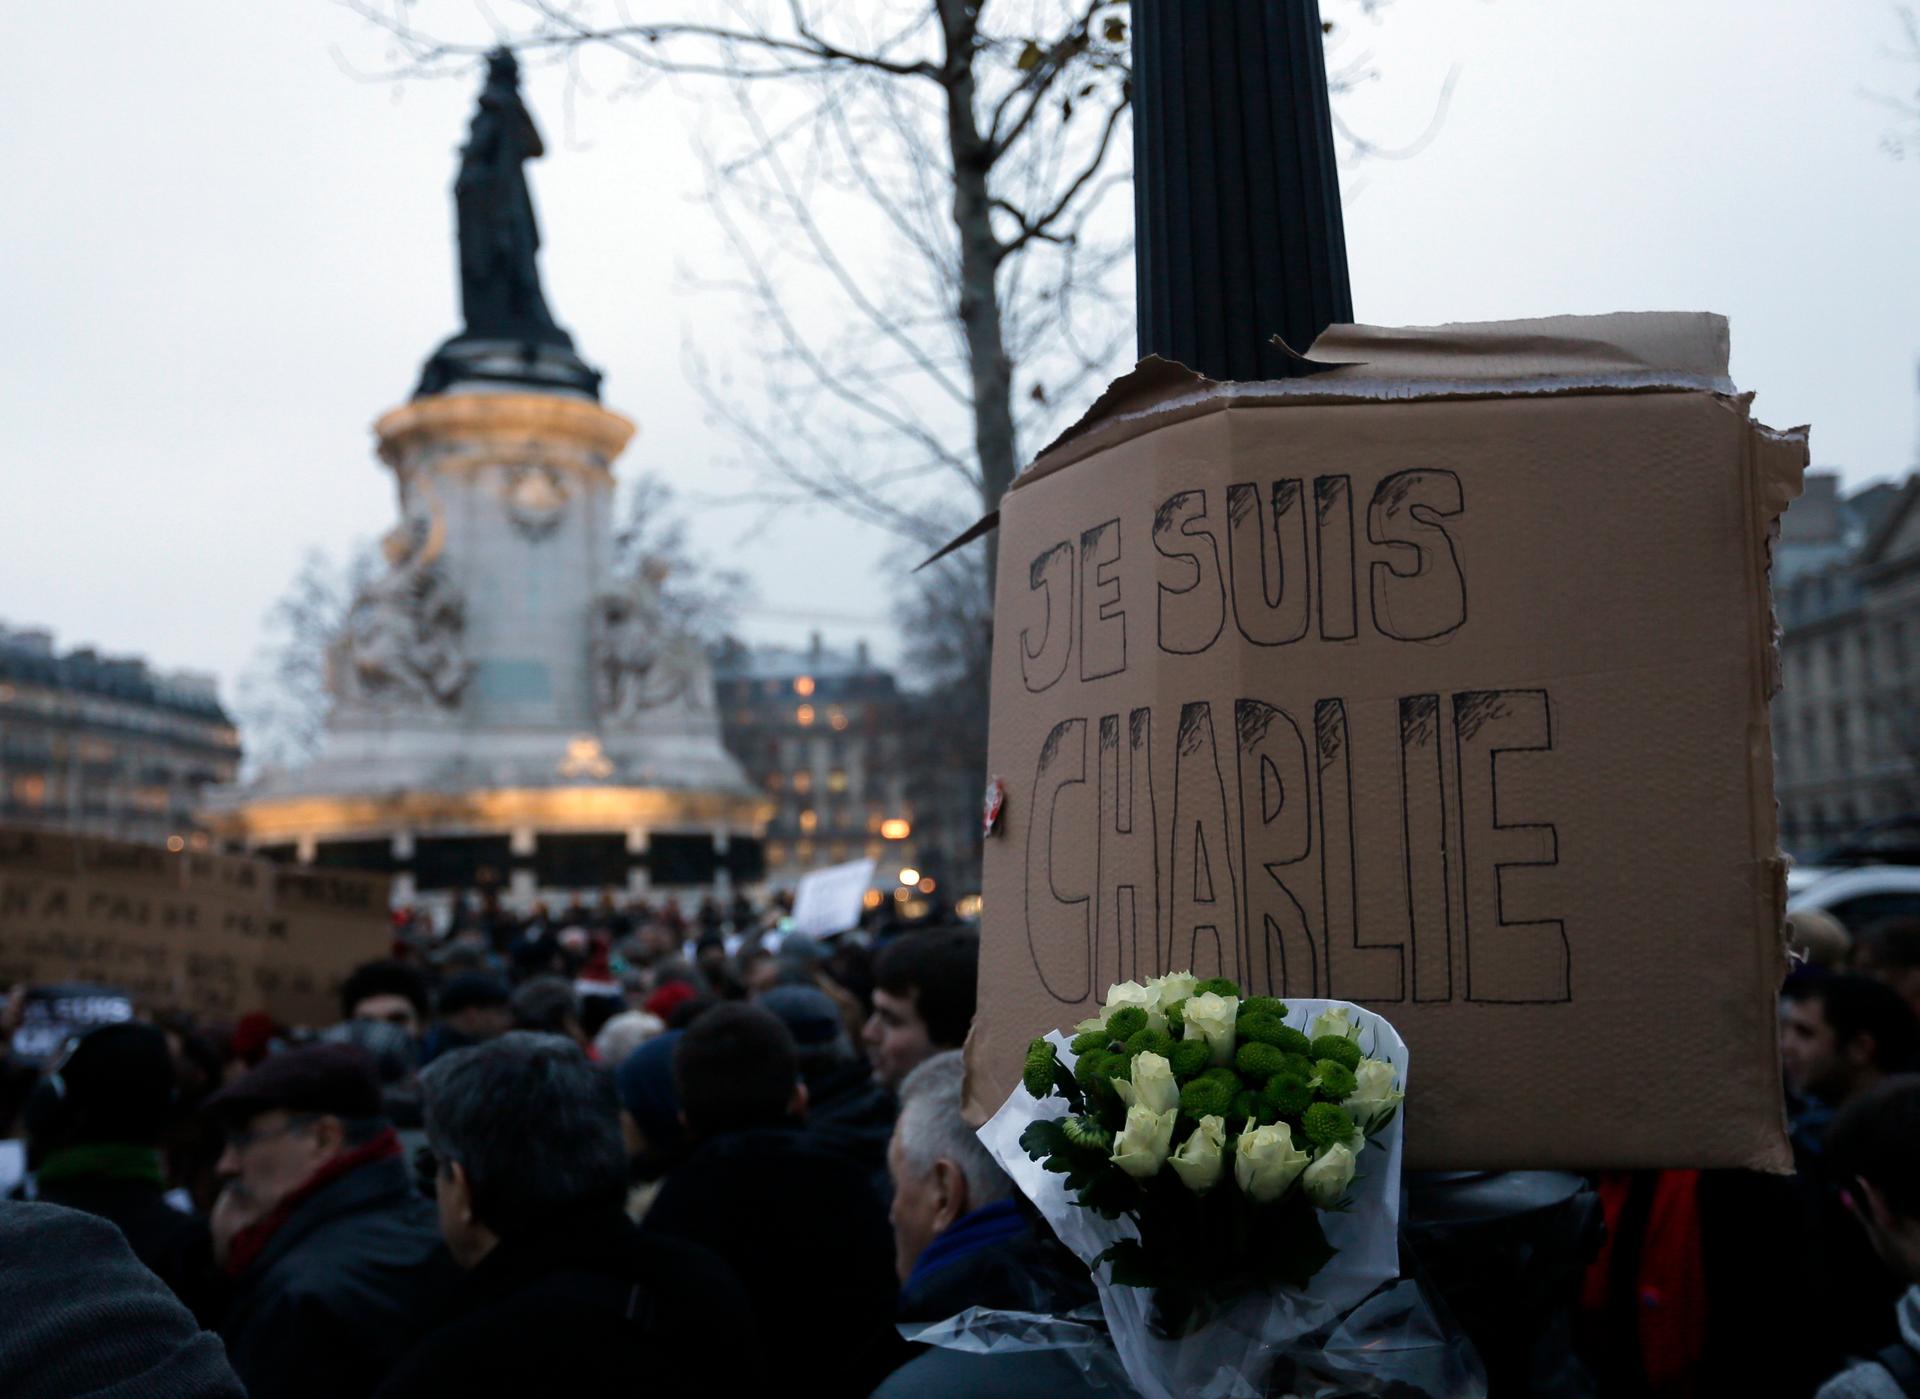 A bouquet of roses is seen near a placard reading "I am Charlie," displayed to pay tribute during a gathering at the Place de la Republique in Paris on January 7, 2015, following a shooting by gunmen at the offices of weekly satirical magazine Charlie Heb